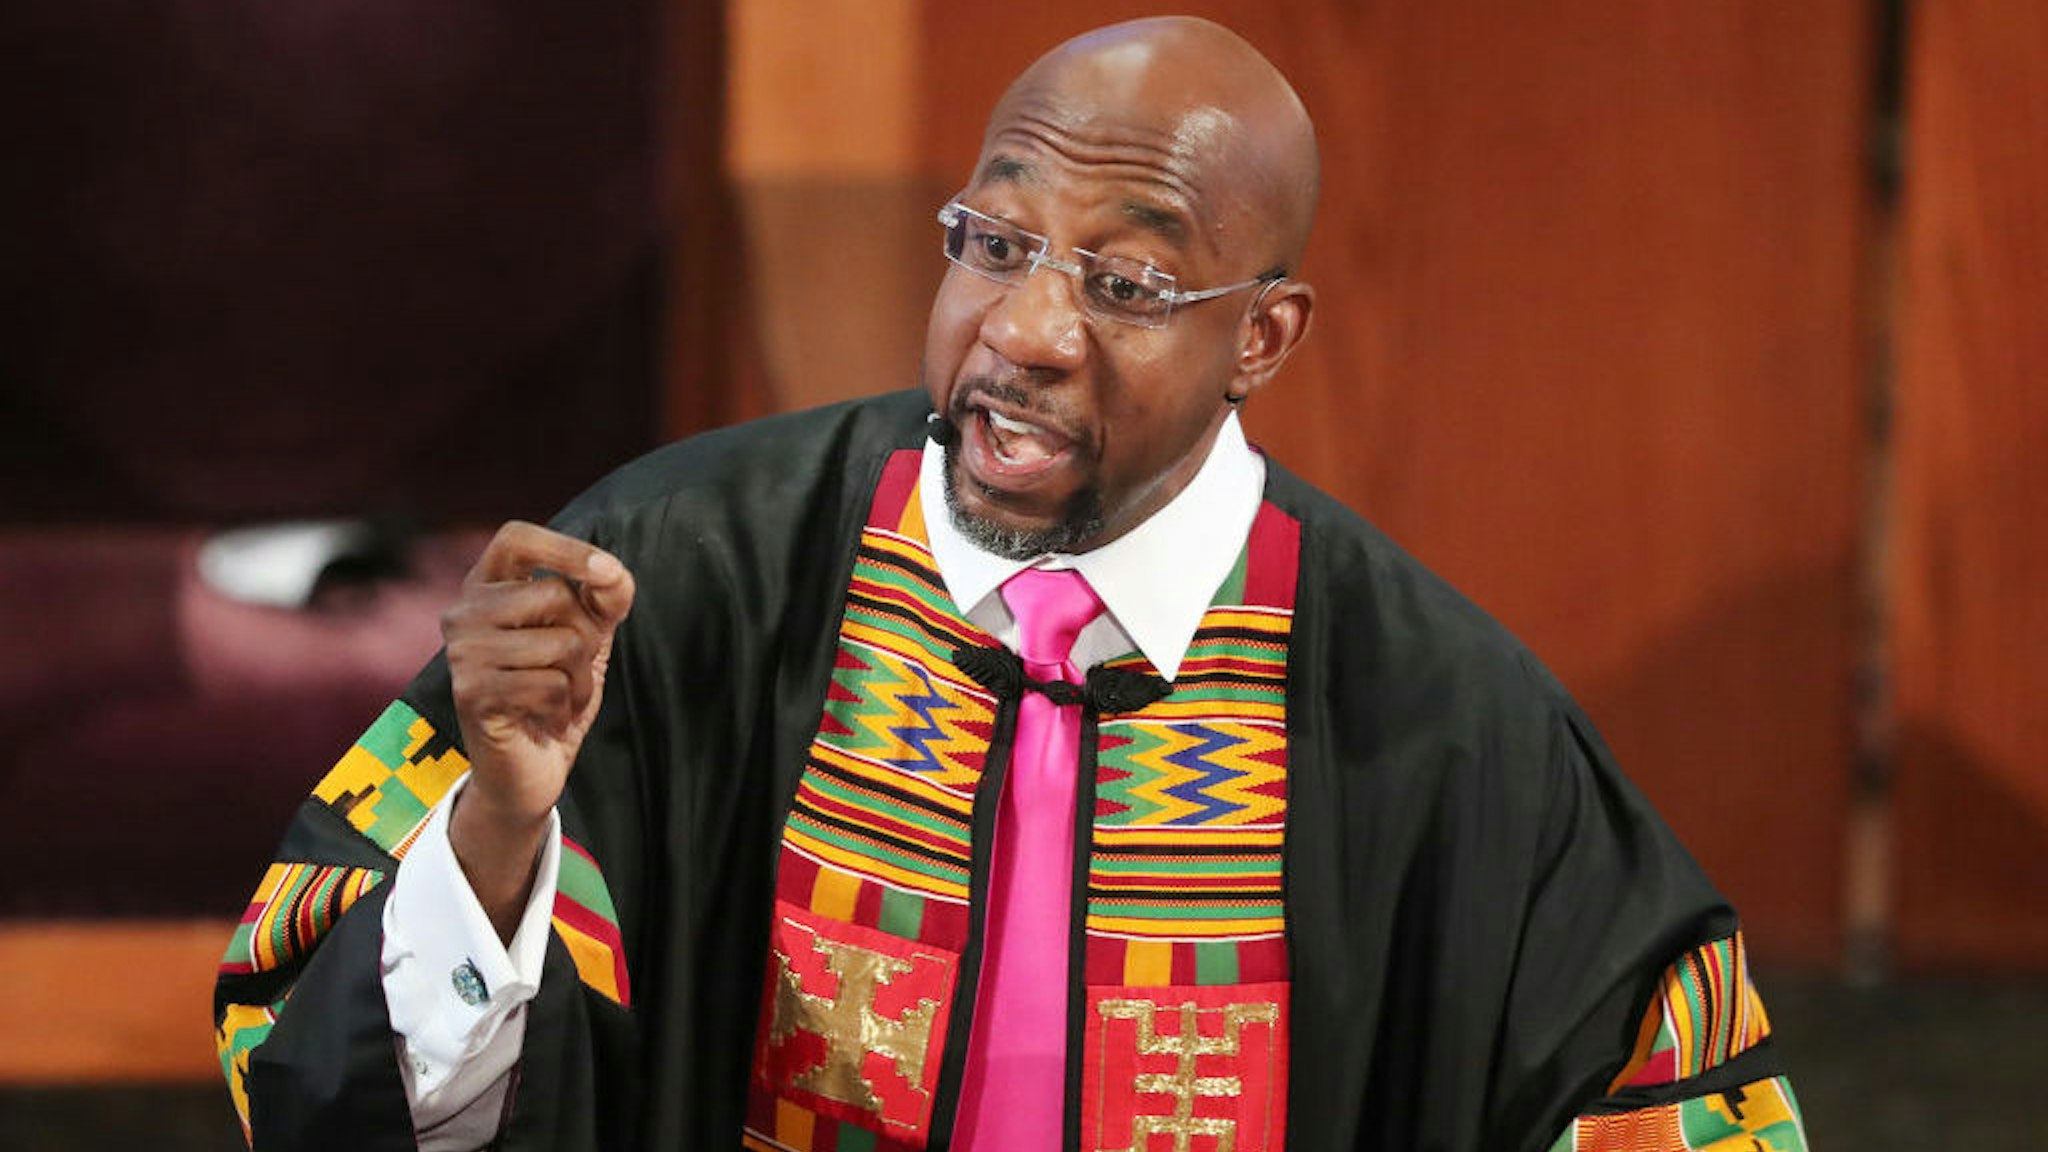 ATLANTA, GEORGIA - JUNE 23: Rev. Raphael G. Warnock delivers the eulogy for Rayshard Brooks at his funeral in Ebenezer Baptist Church on June 23, 2020 in Atlanta. (Photo by Curtis Compton-Pool/Getty Images)